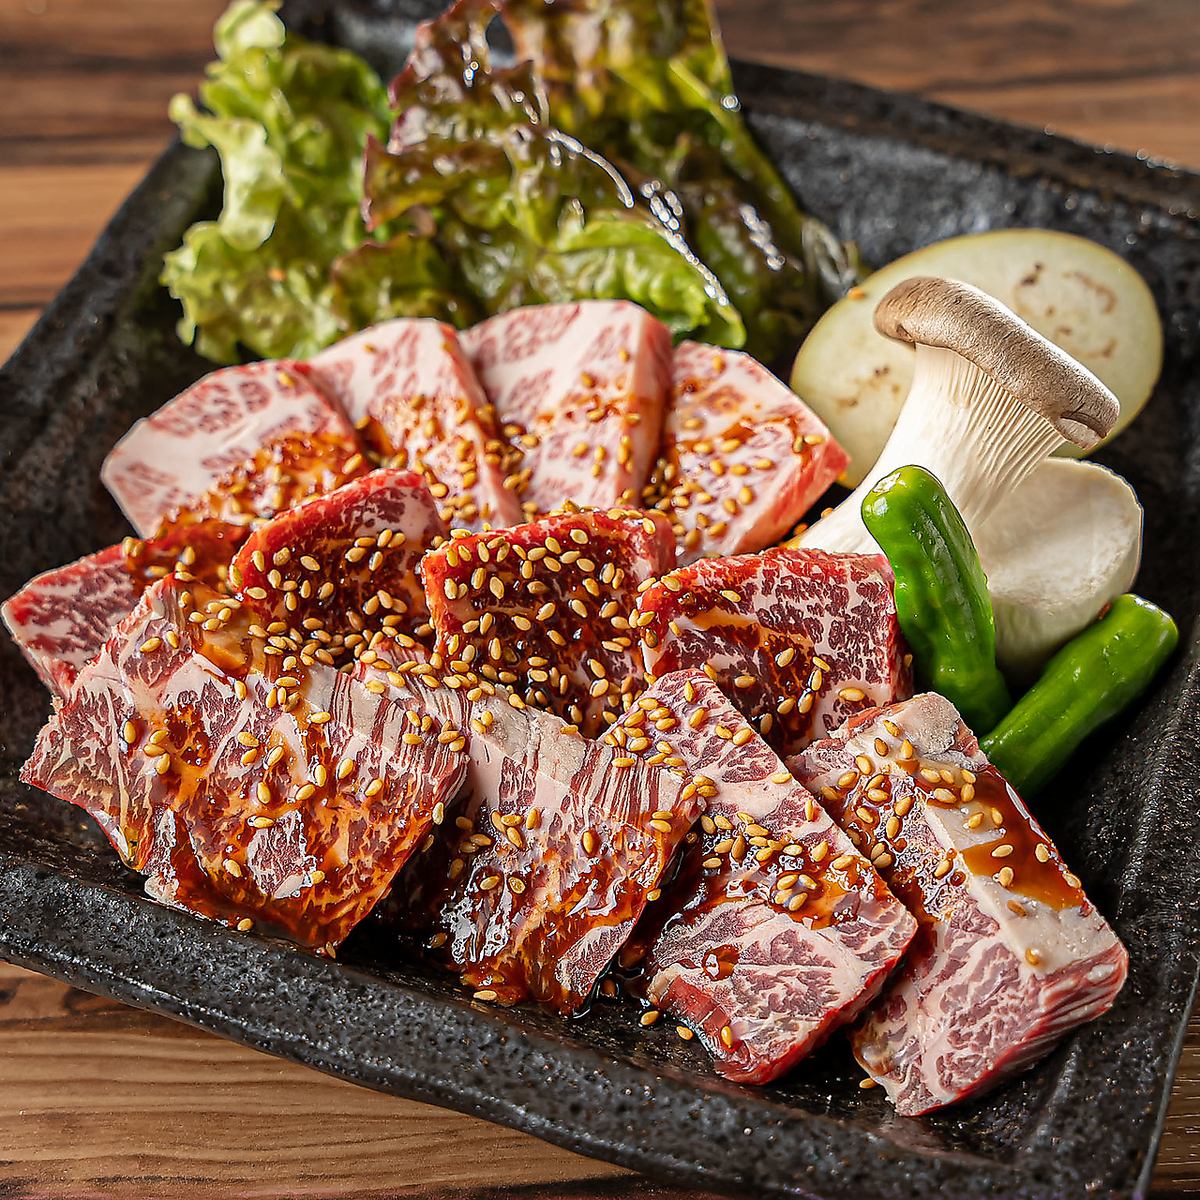 Anyone can enjoy a refreshing and delicious meal because it is Japanese black beef from cows.